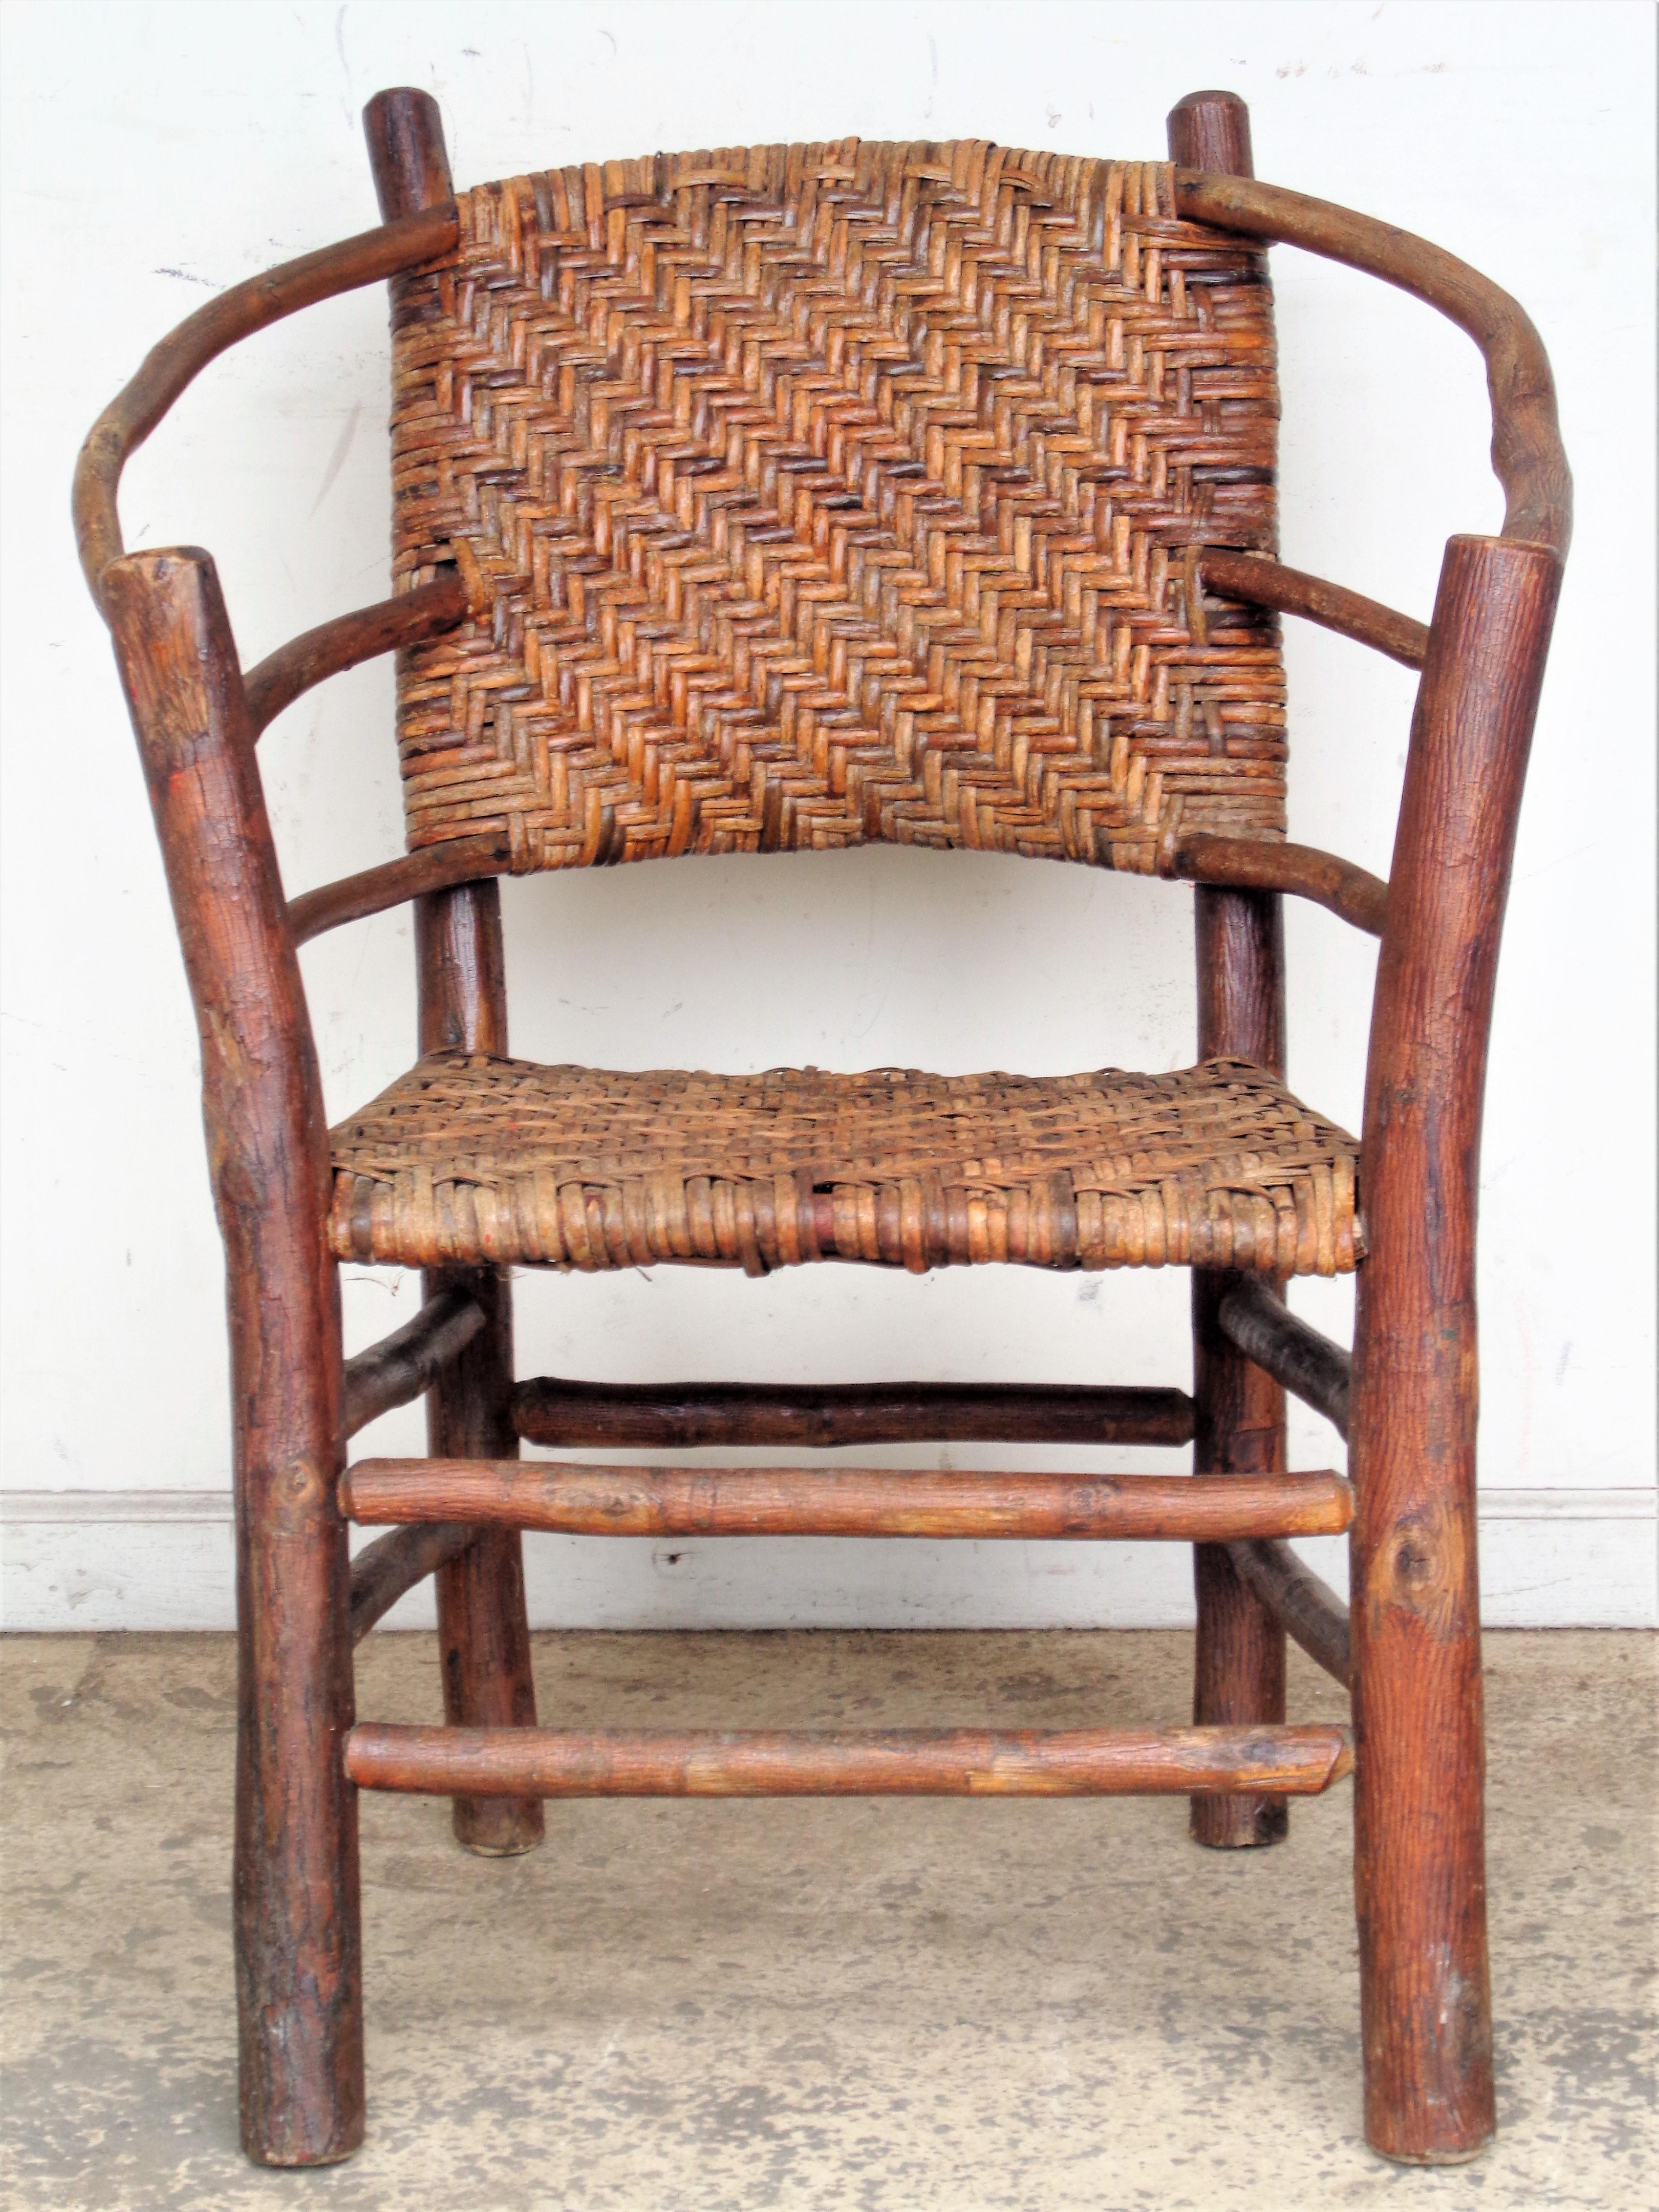 Reed Antique Rustic Hickory Furniture - Settee, Chair, Rocker